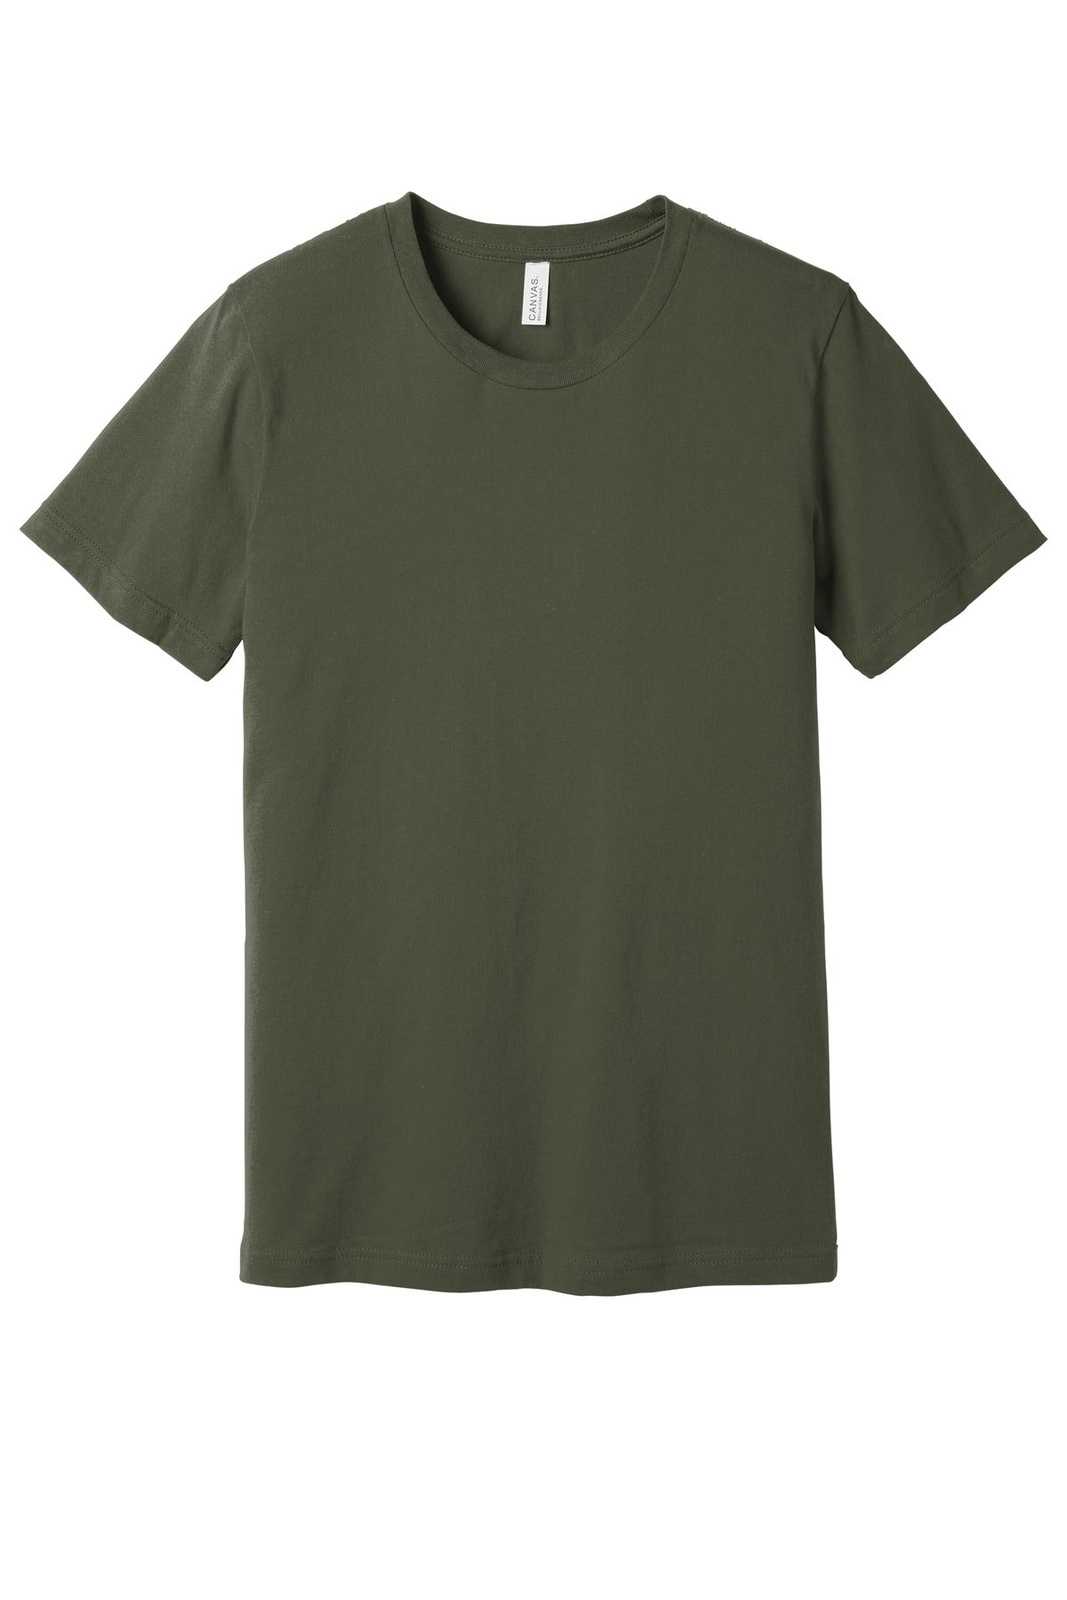 Bella + Canvas 3001 Unisex Jersey Short Sleeve Tee - Army - HIT a Double